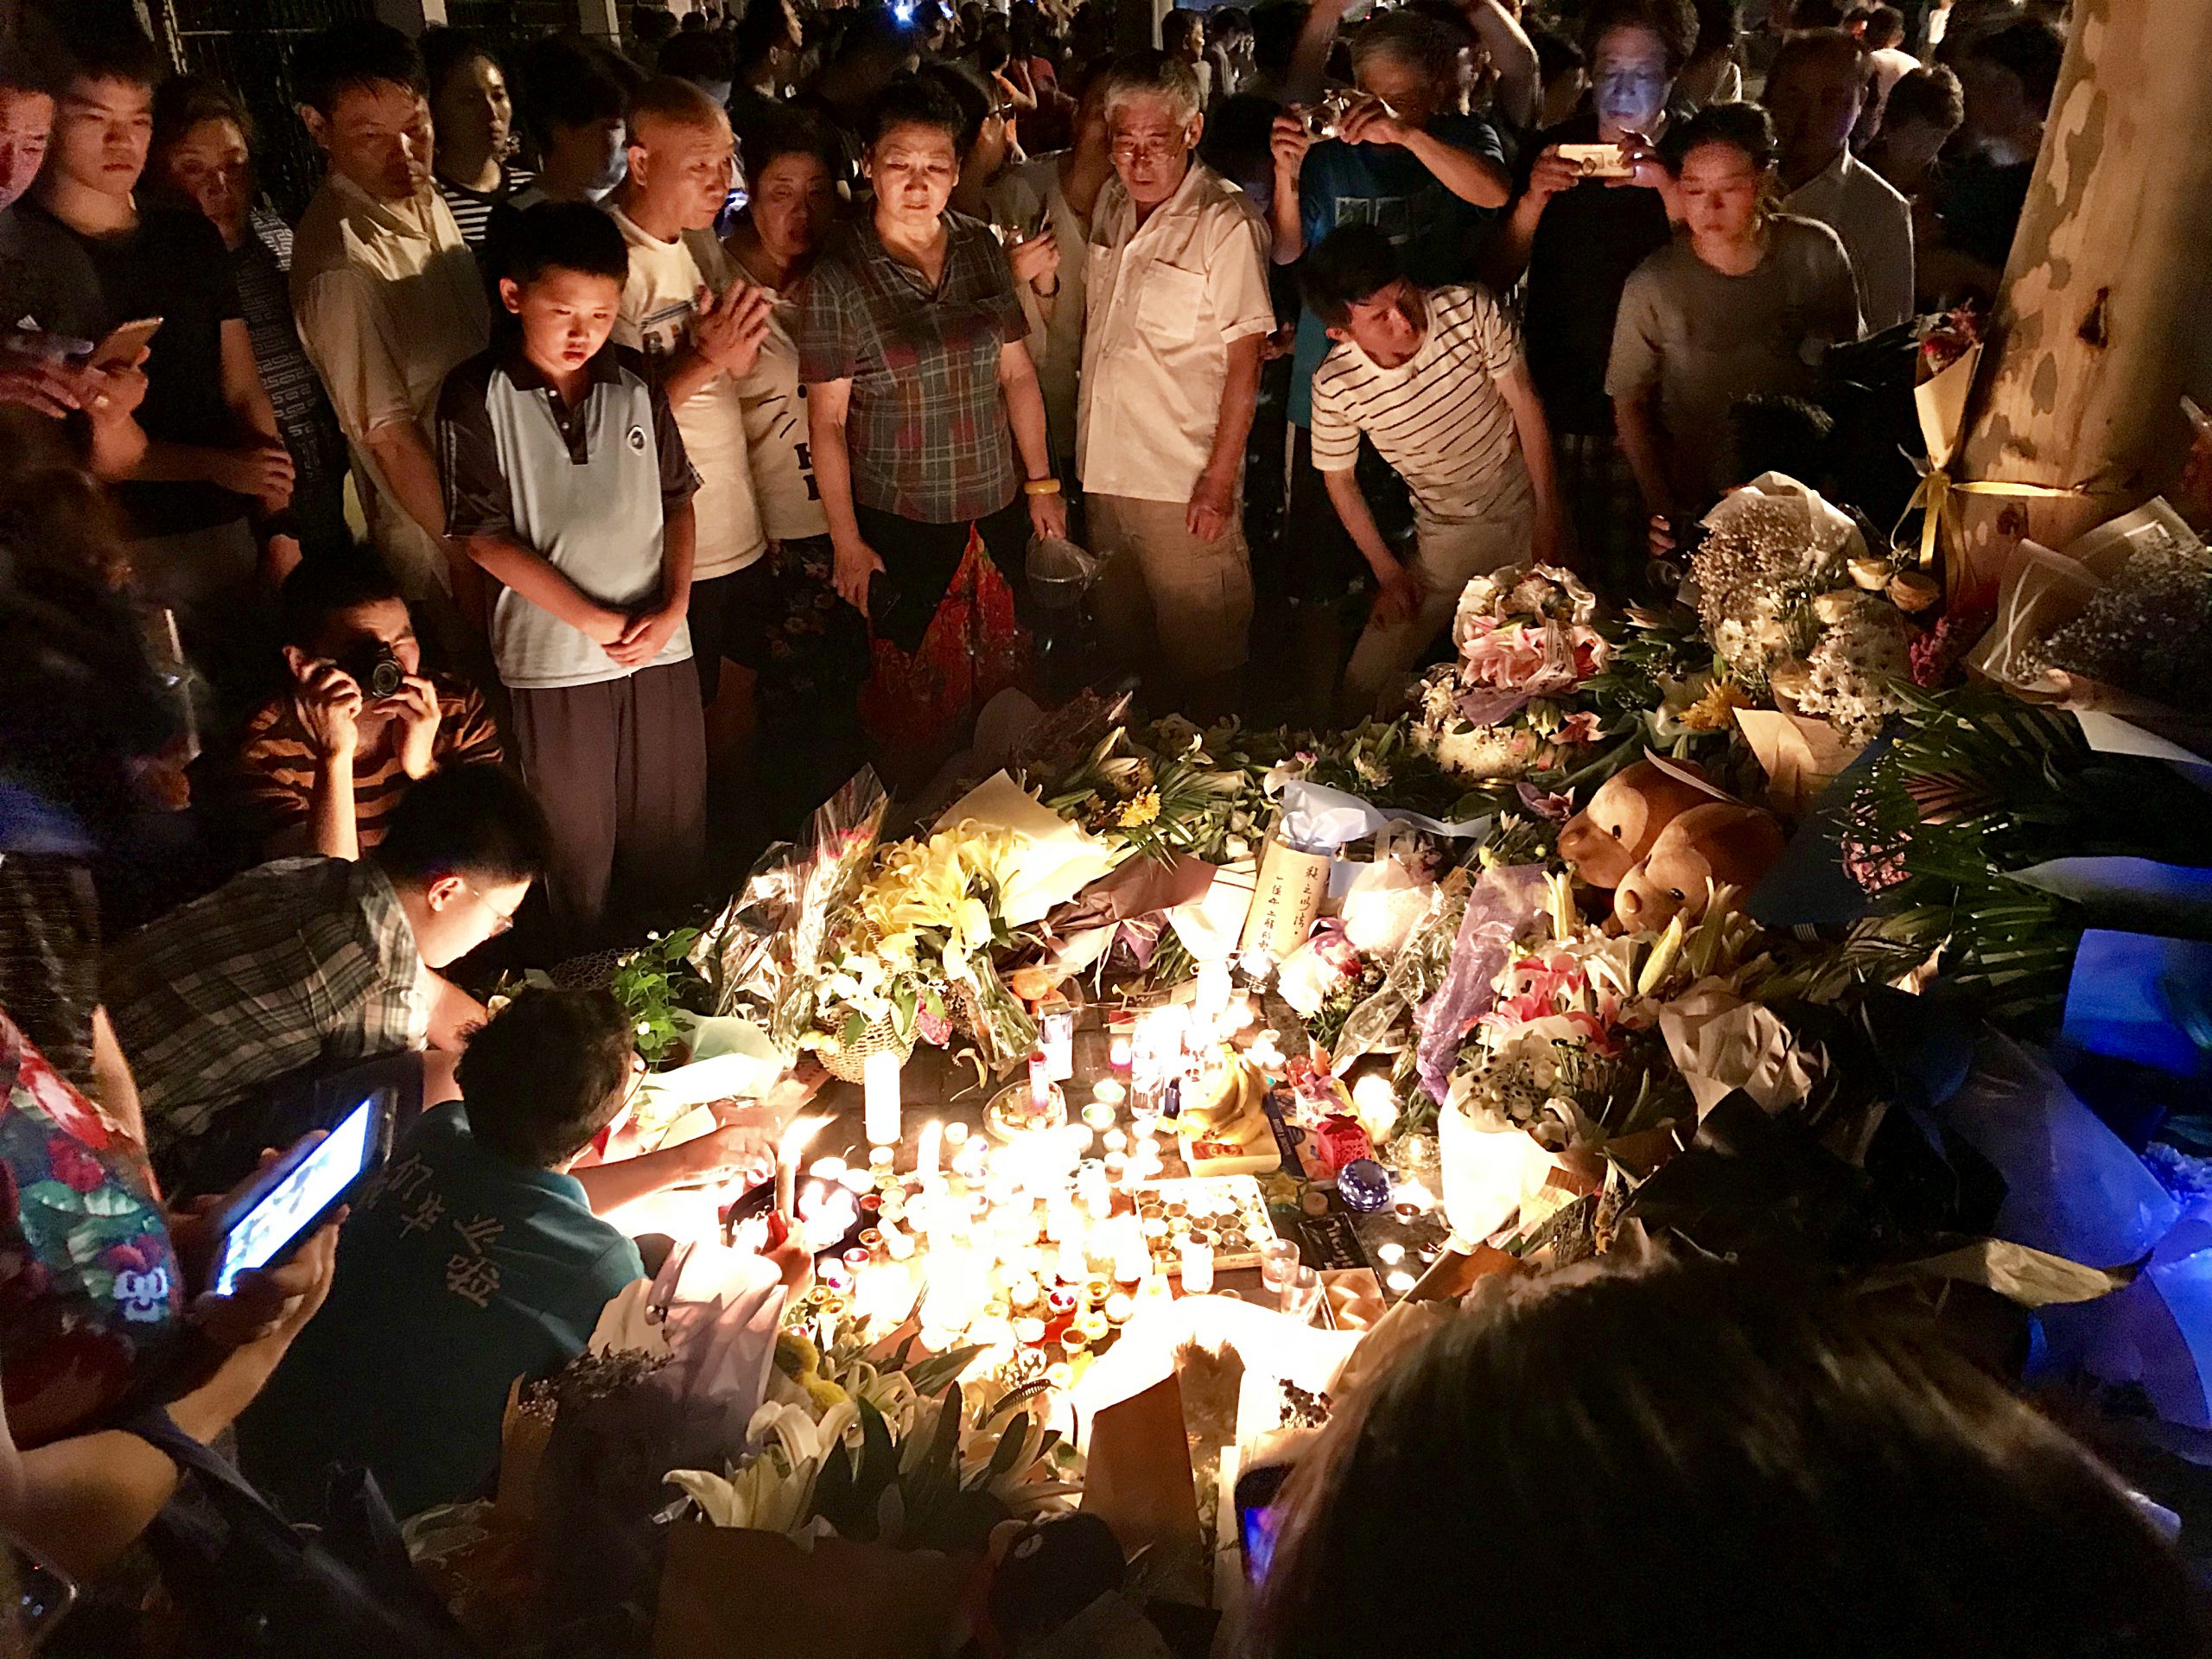 Image showing a Community Grieving at a candlelight vigil